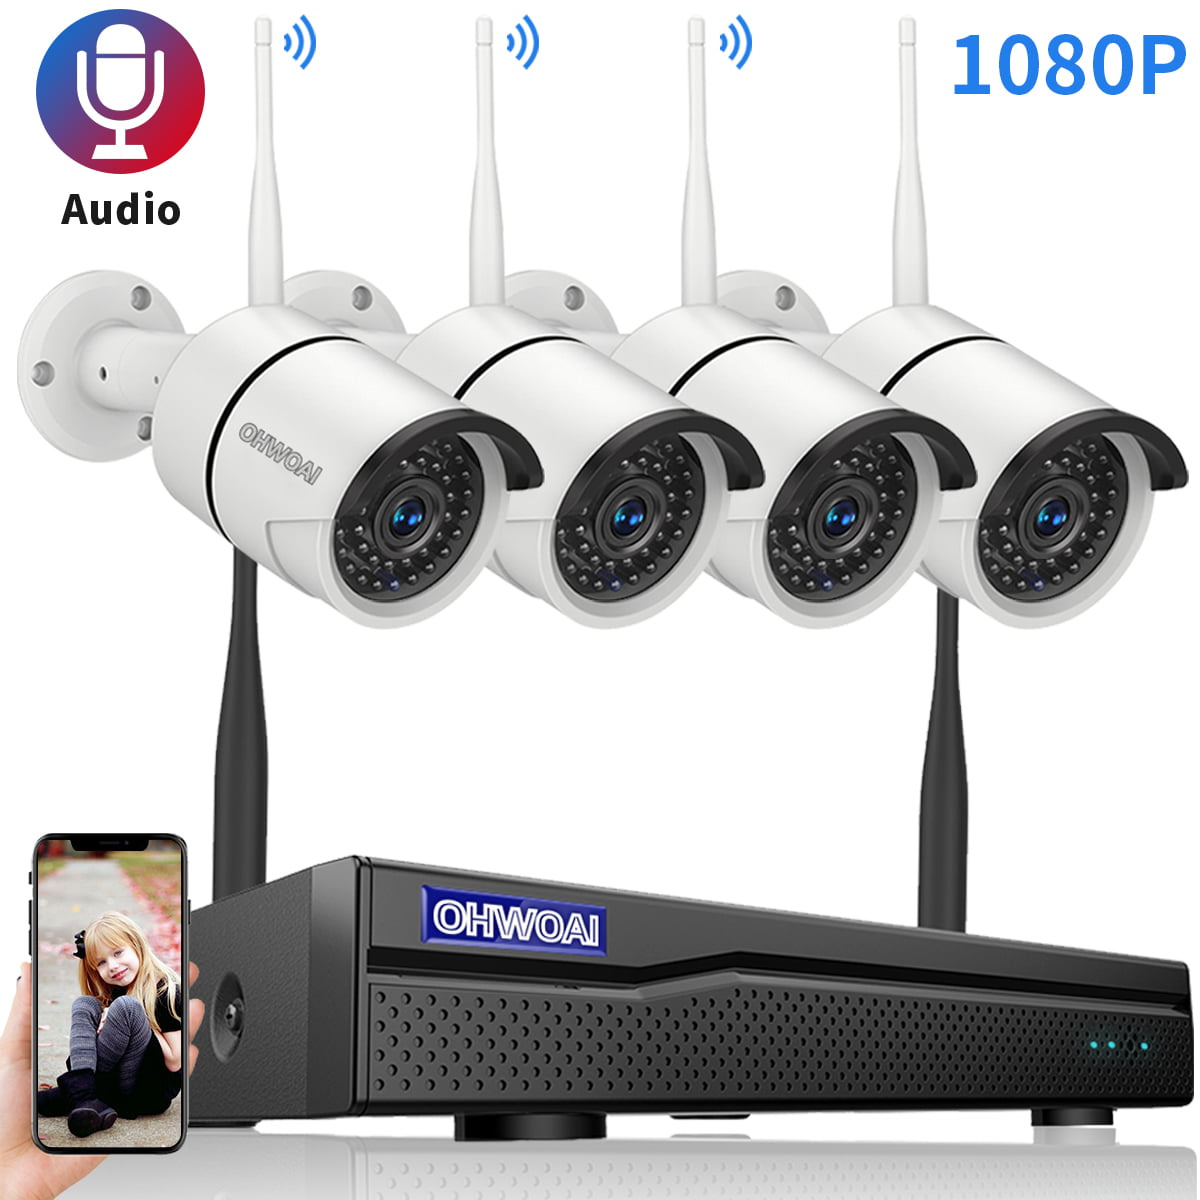 Wireless Security IP Camera System 8CH 1080P NVR Video Outdoor WIFI Network HDMI